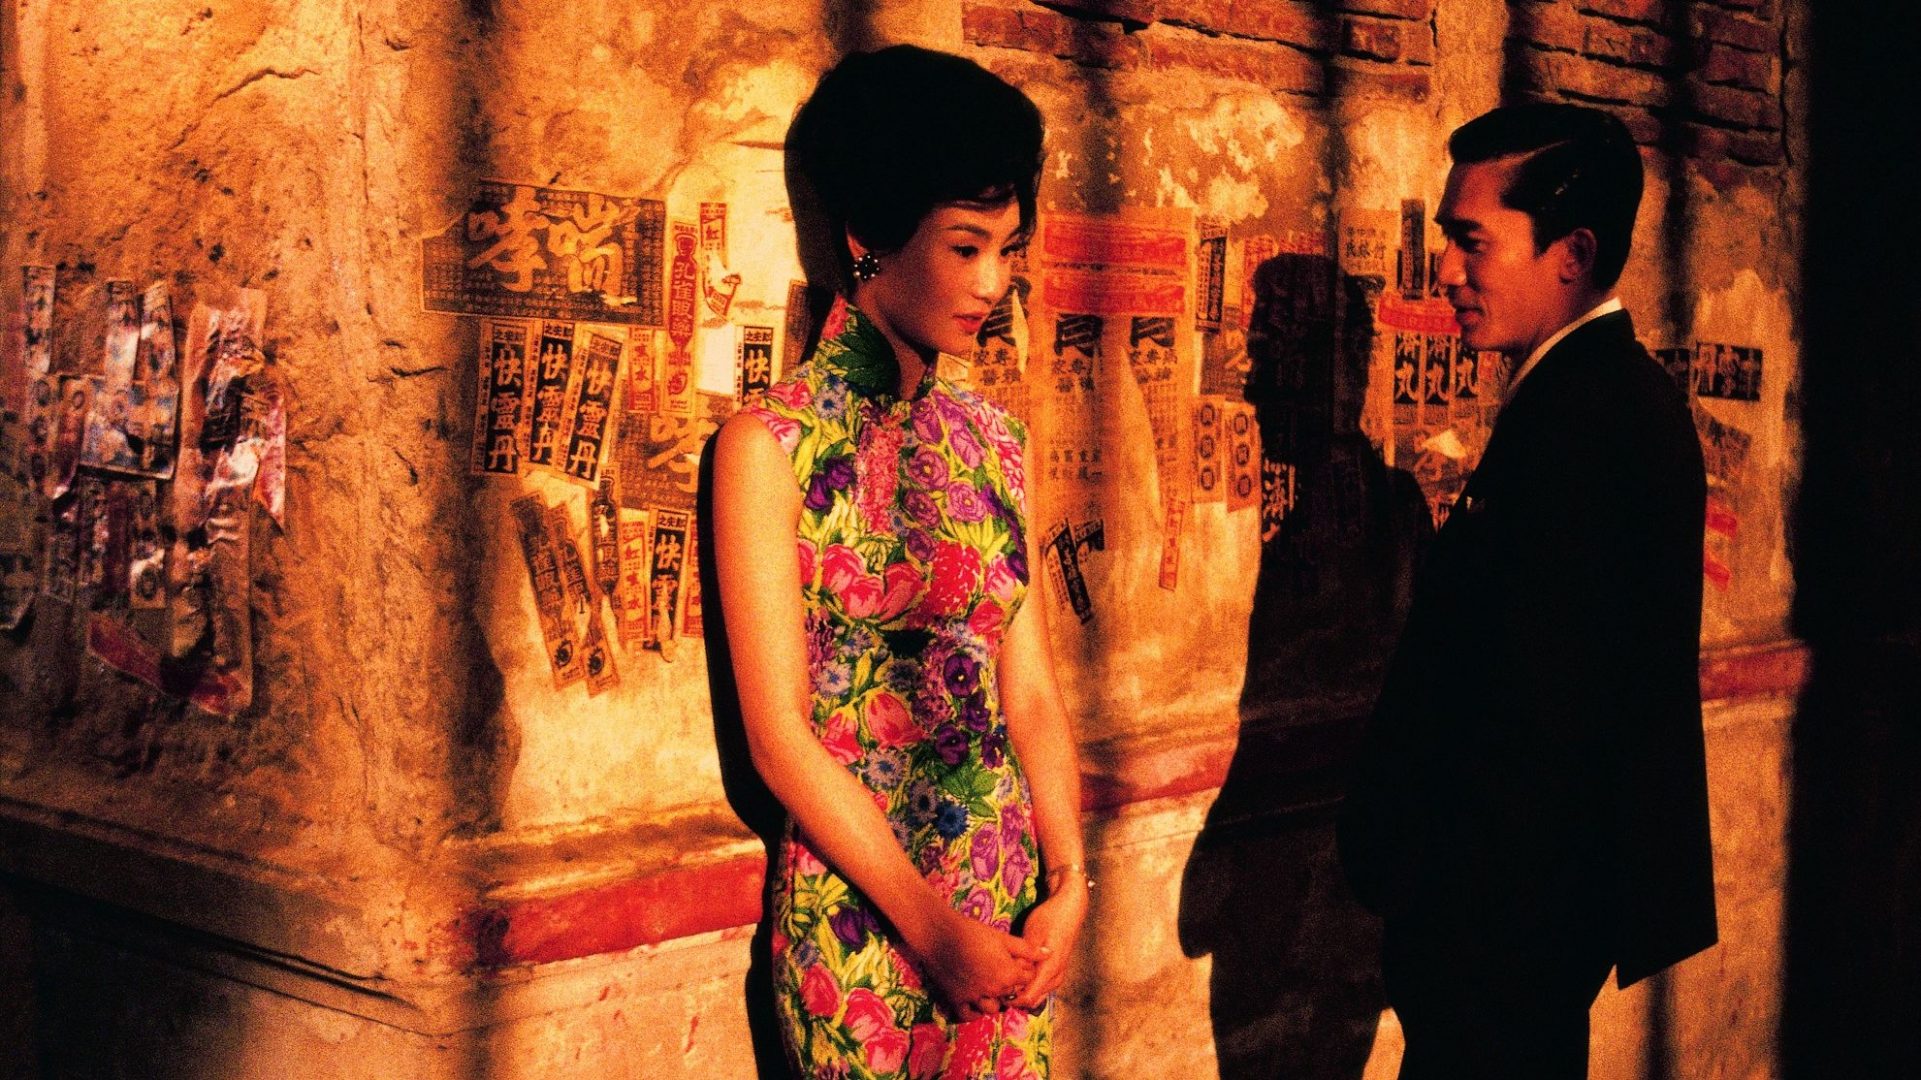 Tony Leung Chiu-wai and Maggie Cheung, In the Mood for Love